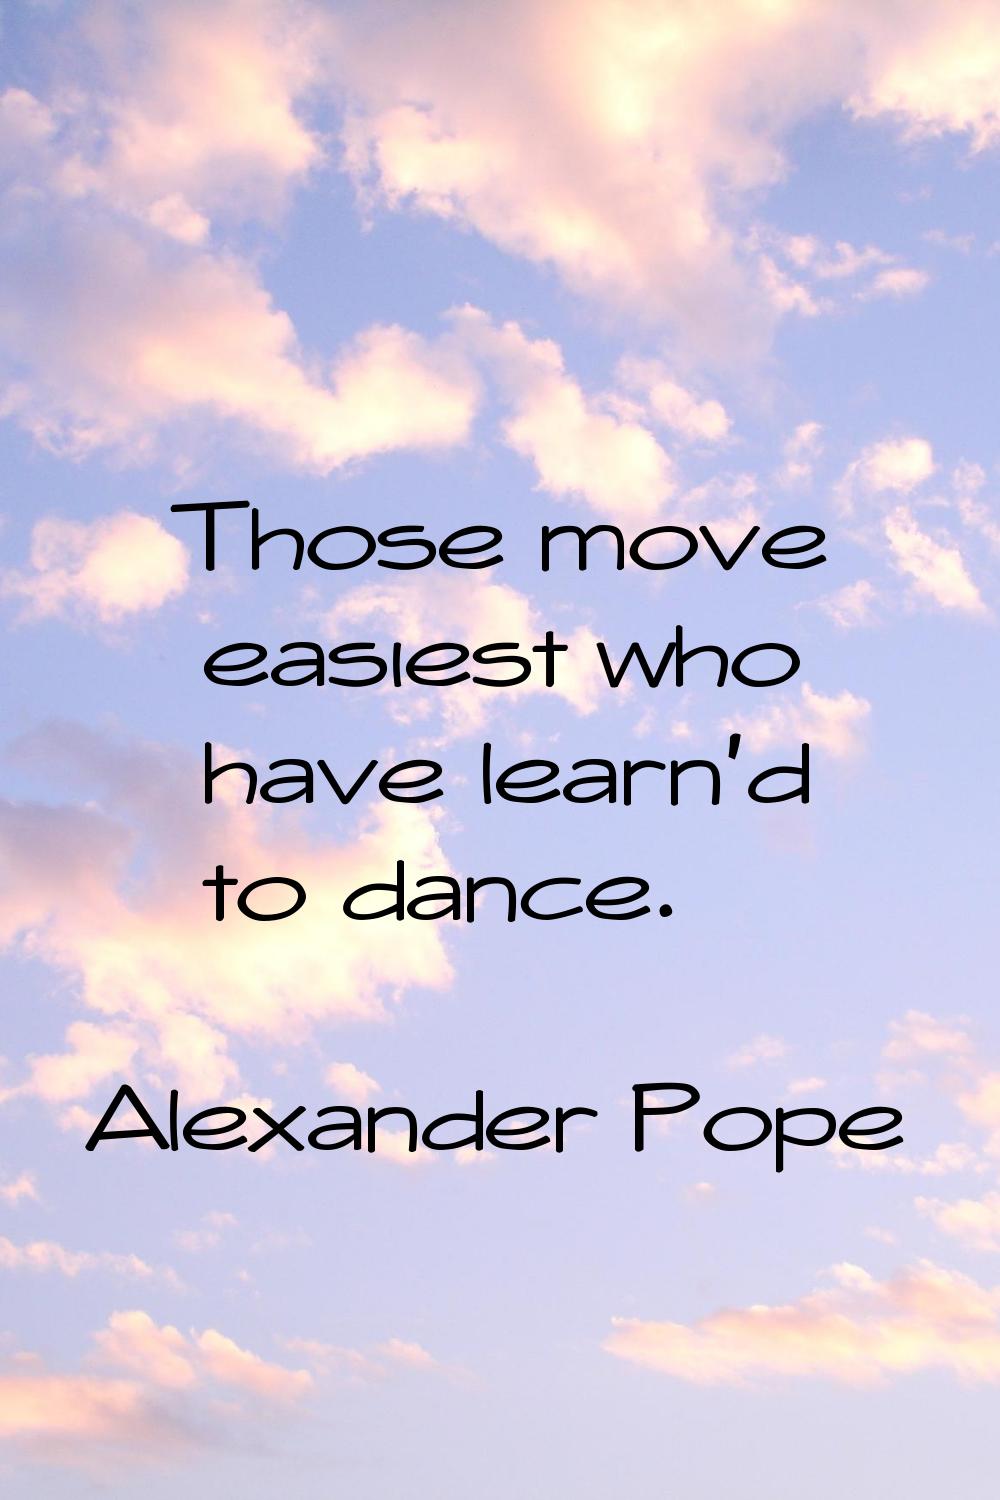 Those move easiest who have learn'd to dance.